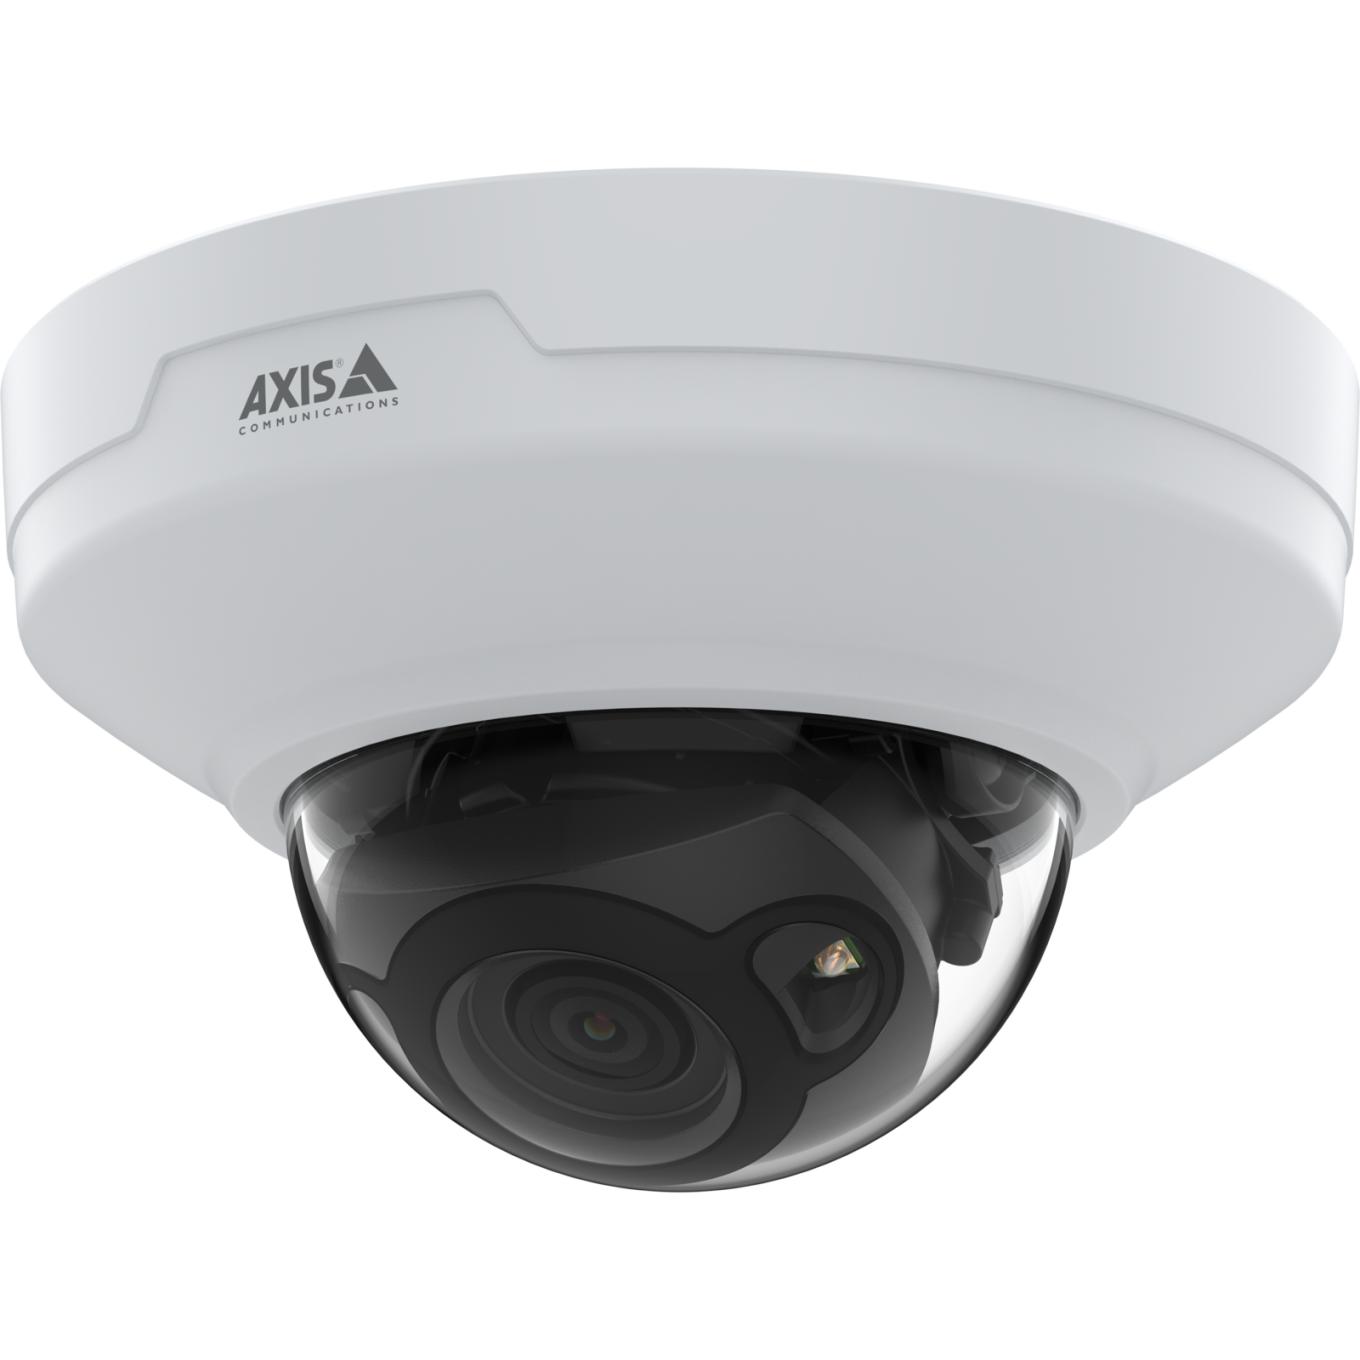 AXIS M4218-LV Dome Camera, viewed from its left angle